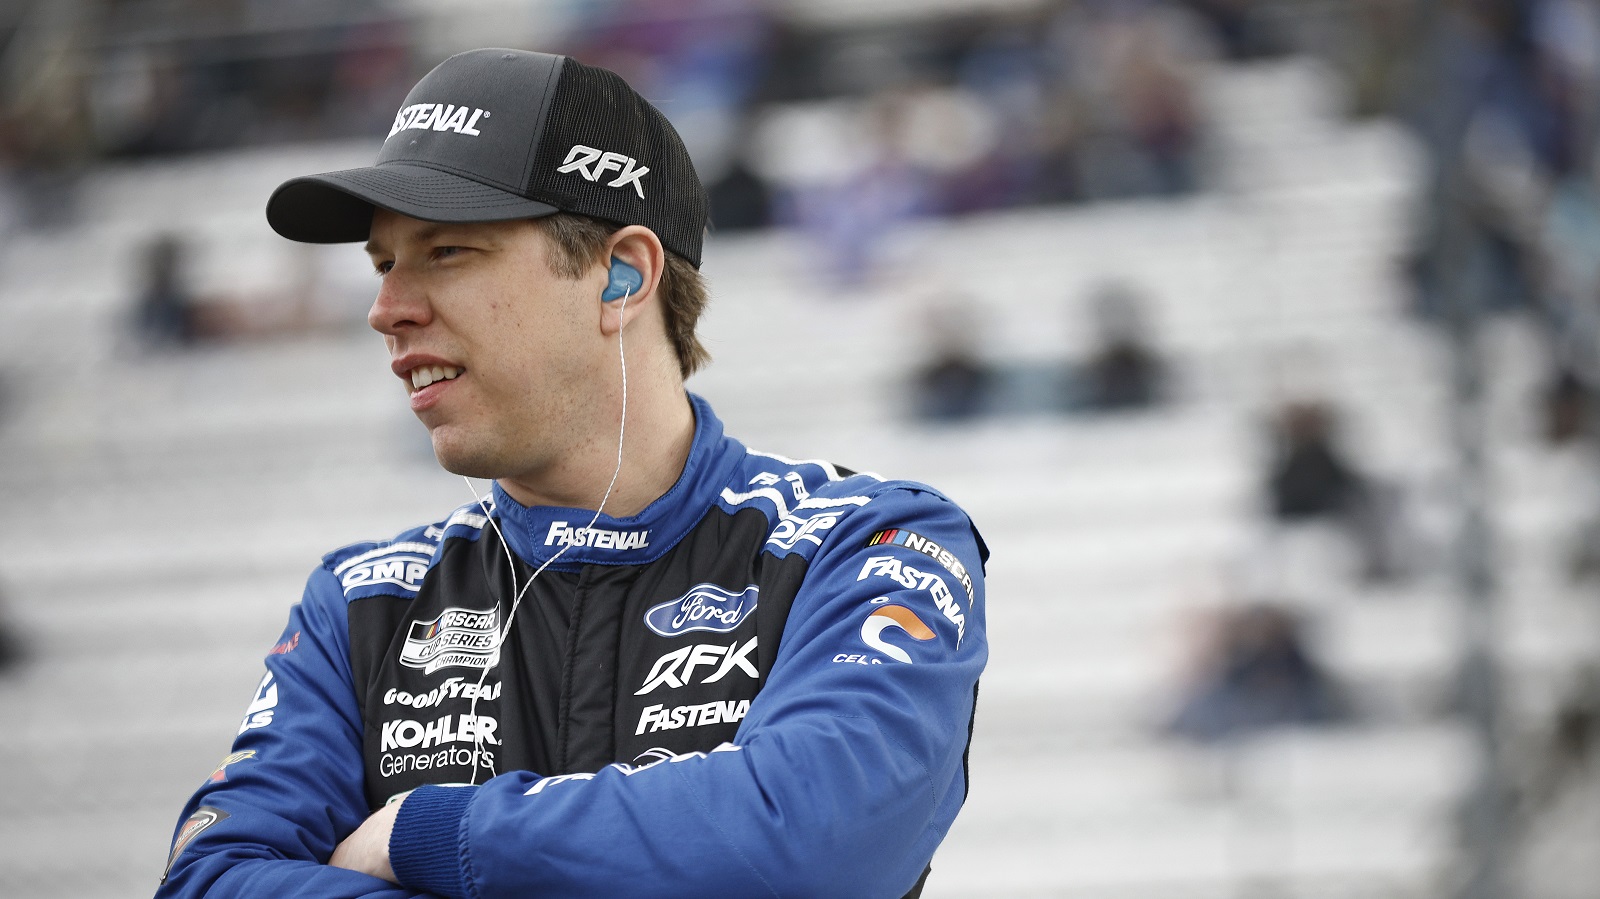 Brad Keselowski looks on during qualifying for the NASCAR Cup Series Blue-Emu Maximum Pain Relief 400 at Martinsville Speedway on April 8, 2022 in Martinsville, Virginia. | Jared C. Tilton/Getty Images